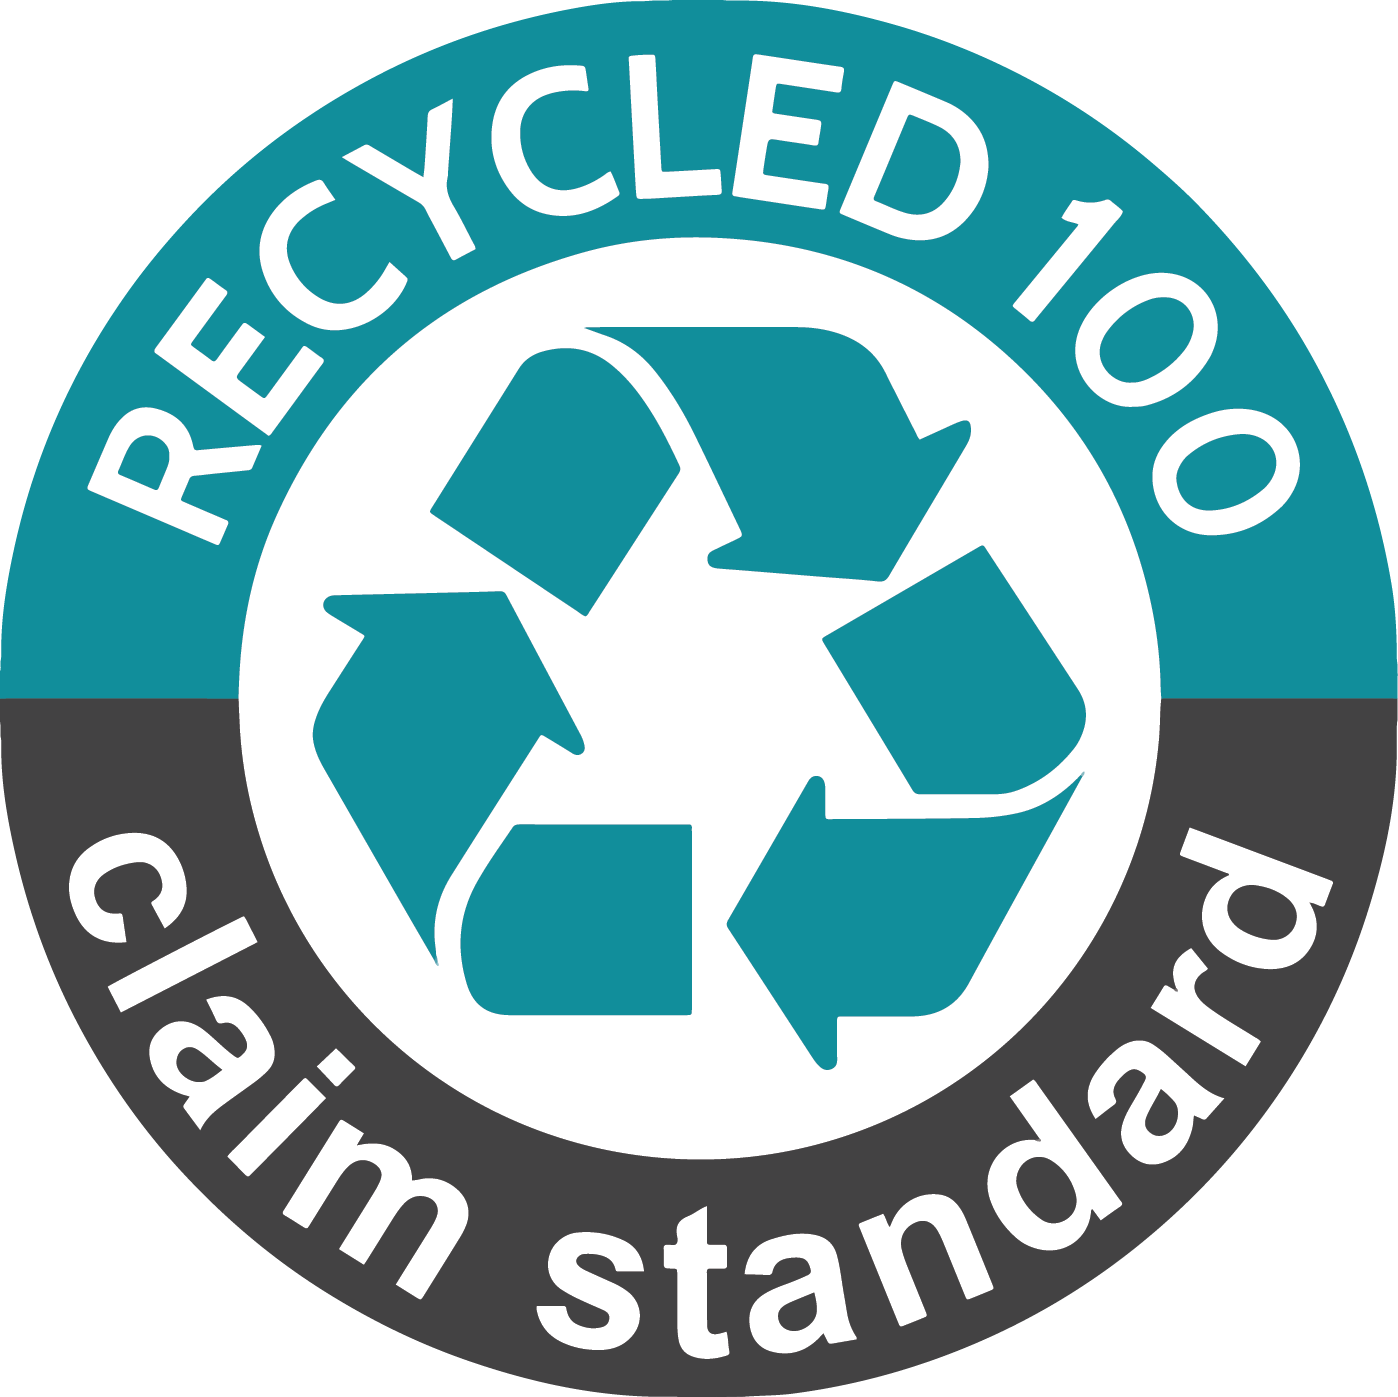 Recycled 100 Claim Standard | Cross Textiles